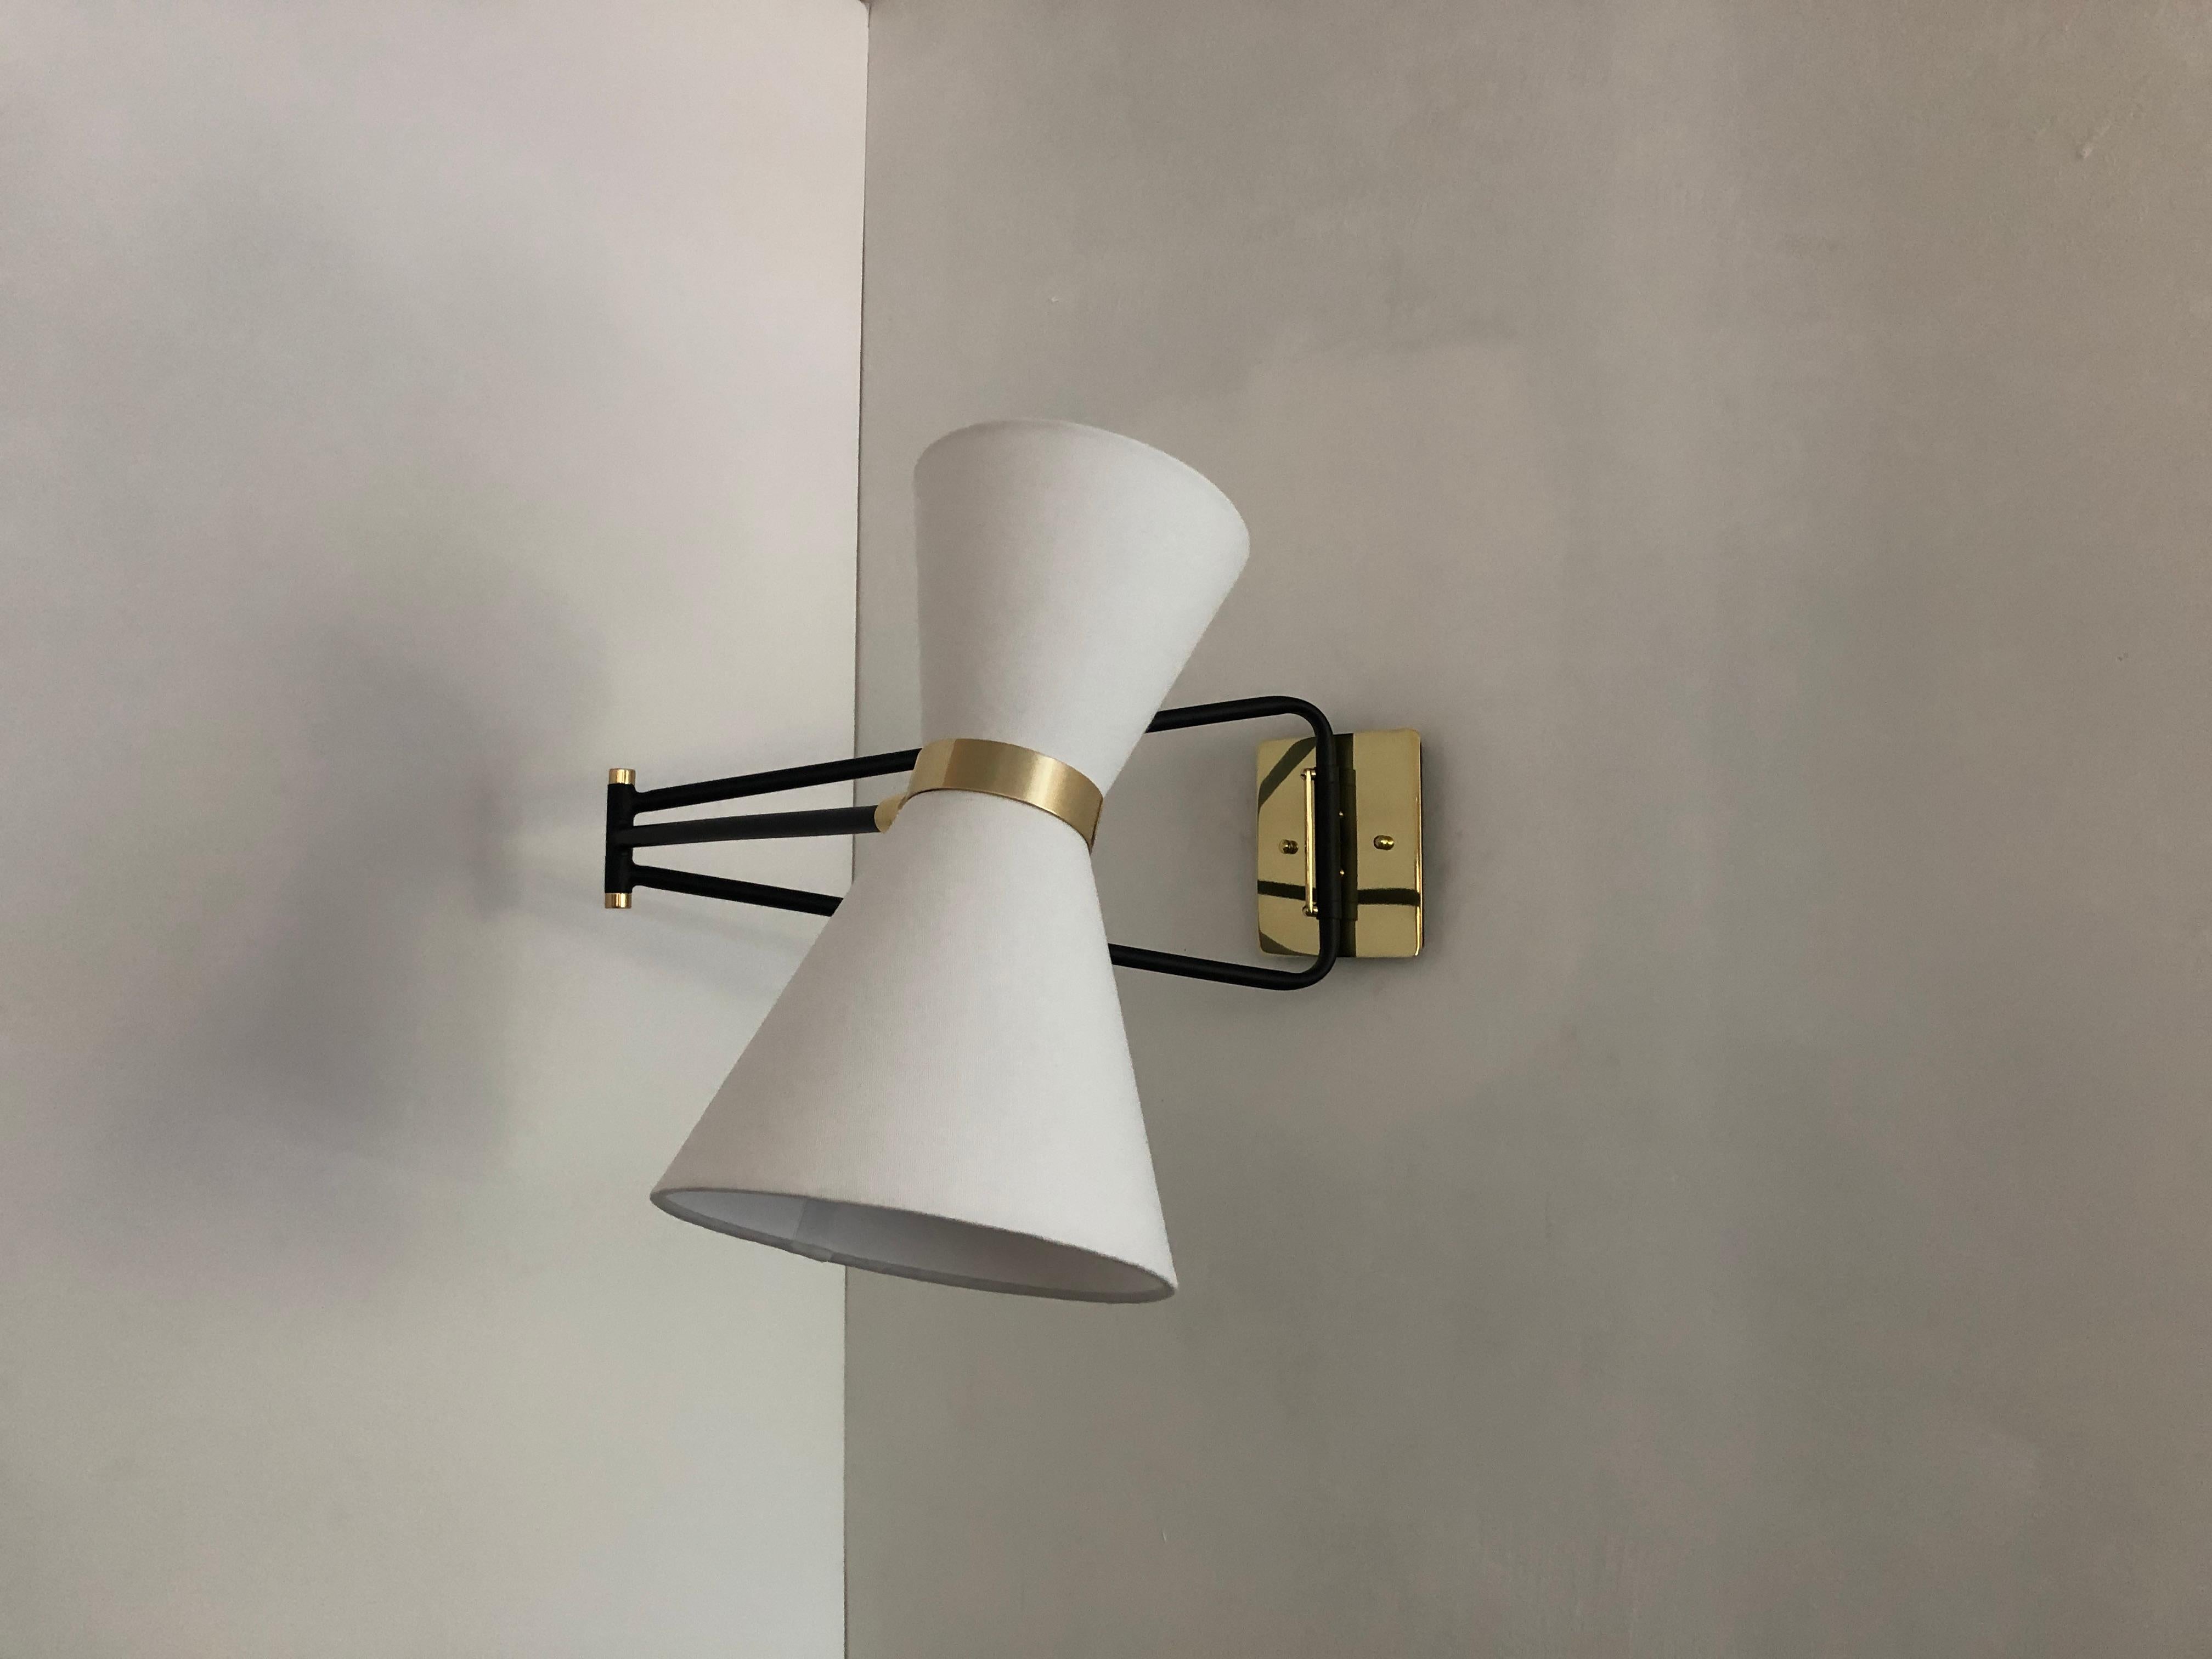 American Bolivar Sconce, White Fabric Shade, by Bourgeois Boheme Atelier